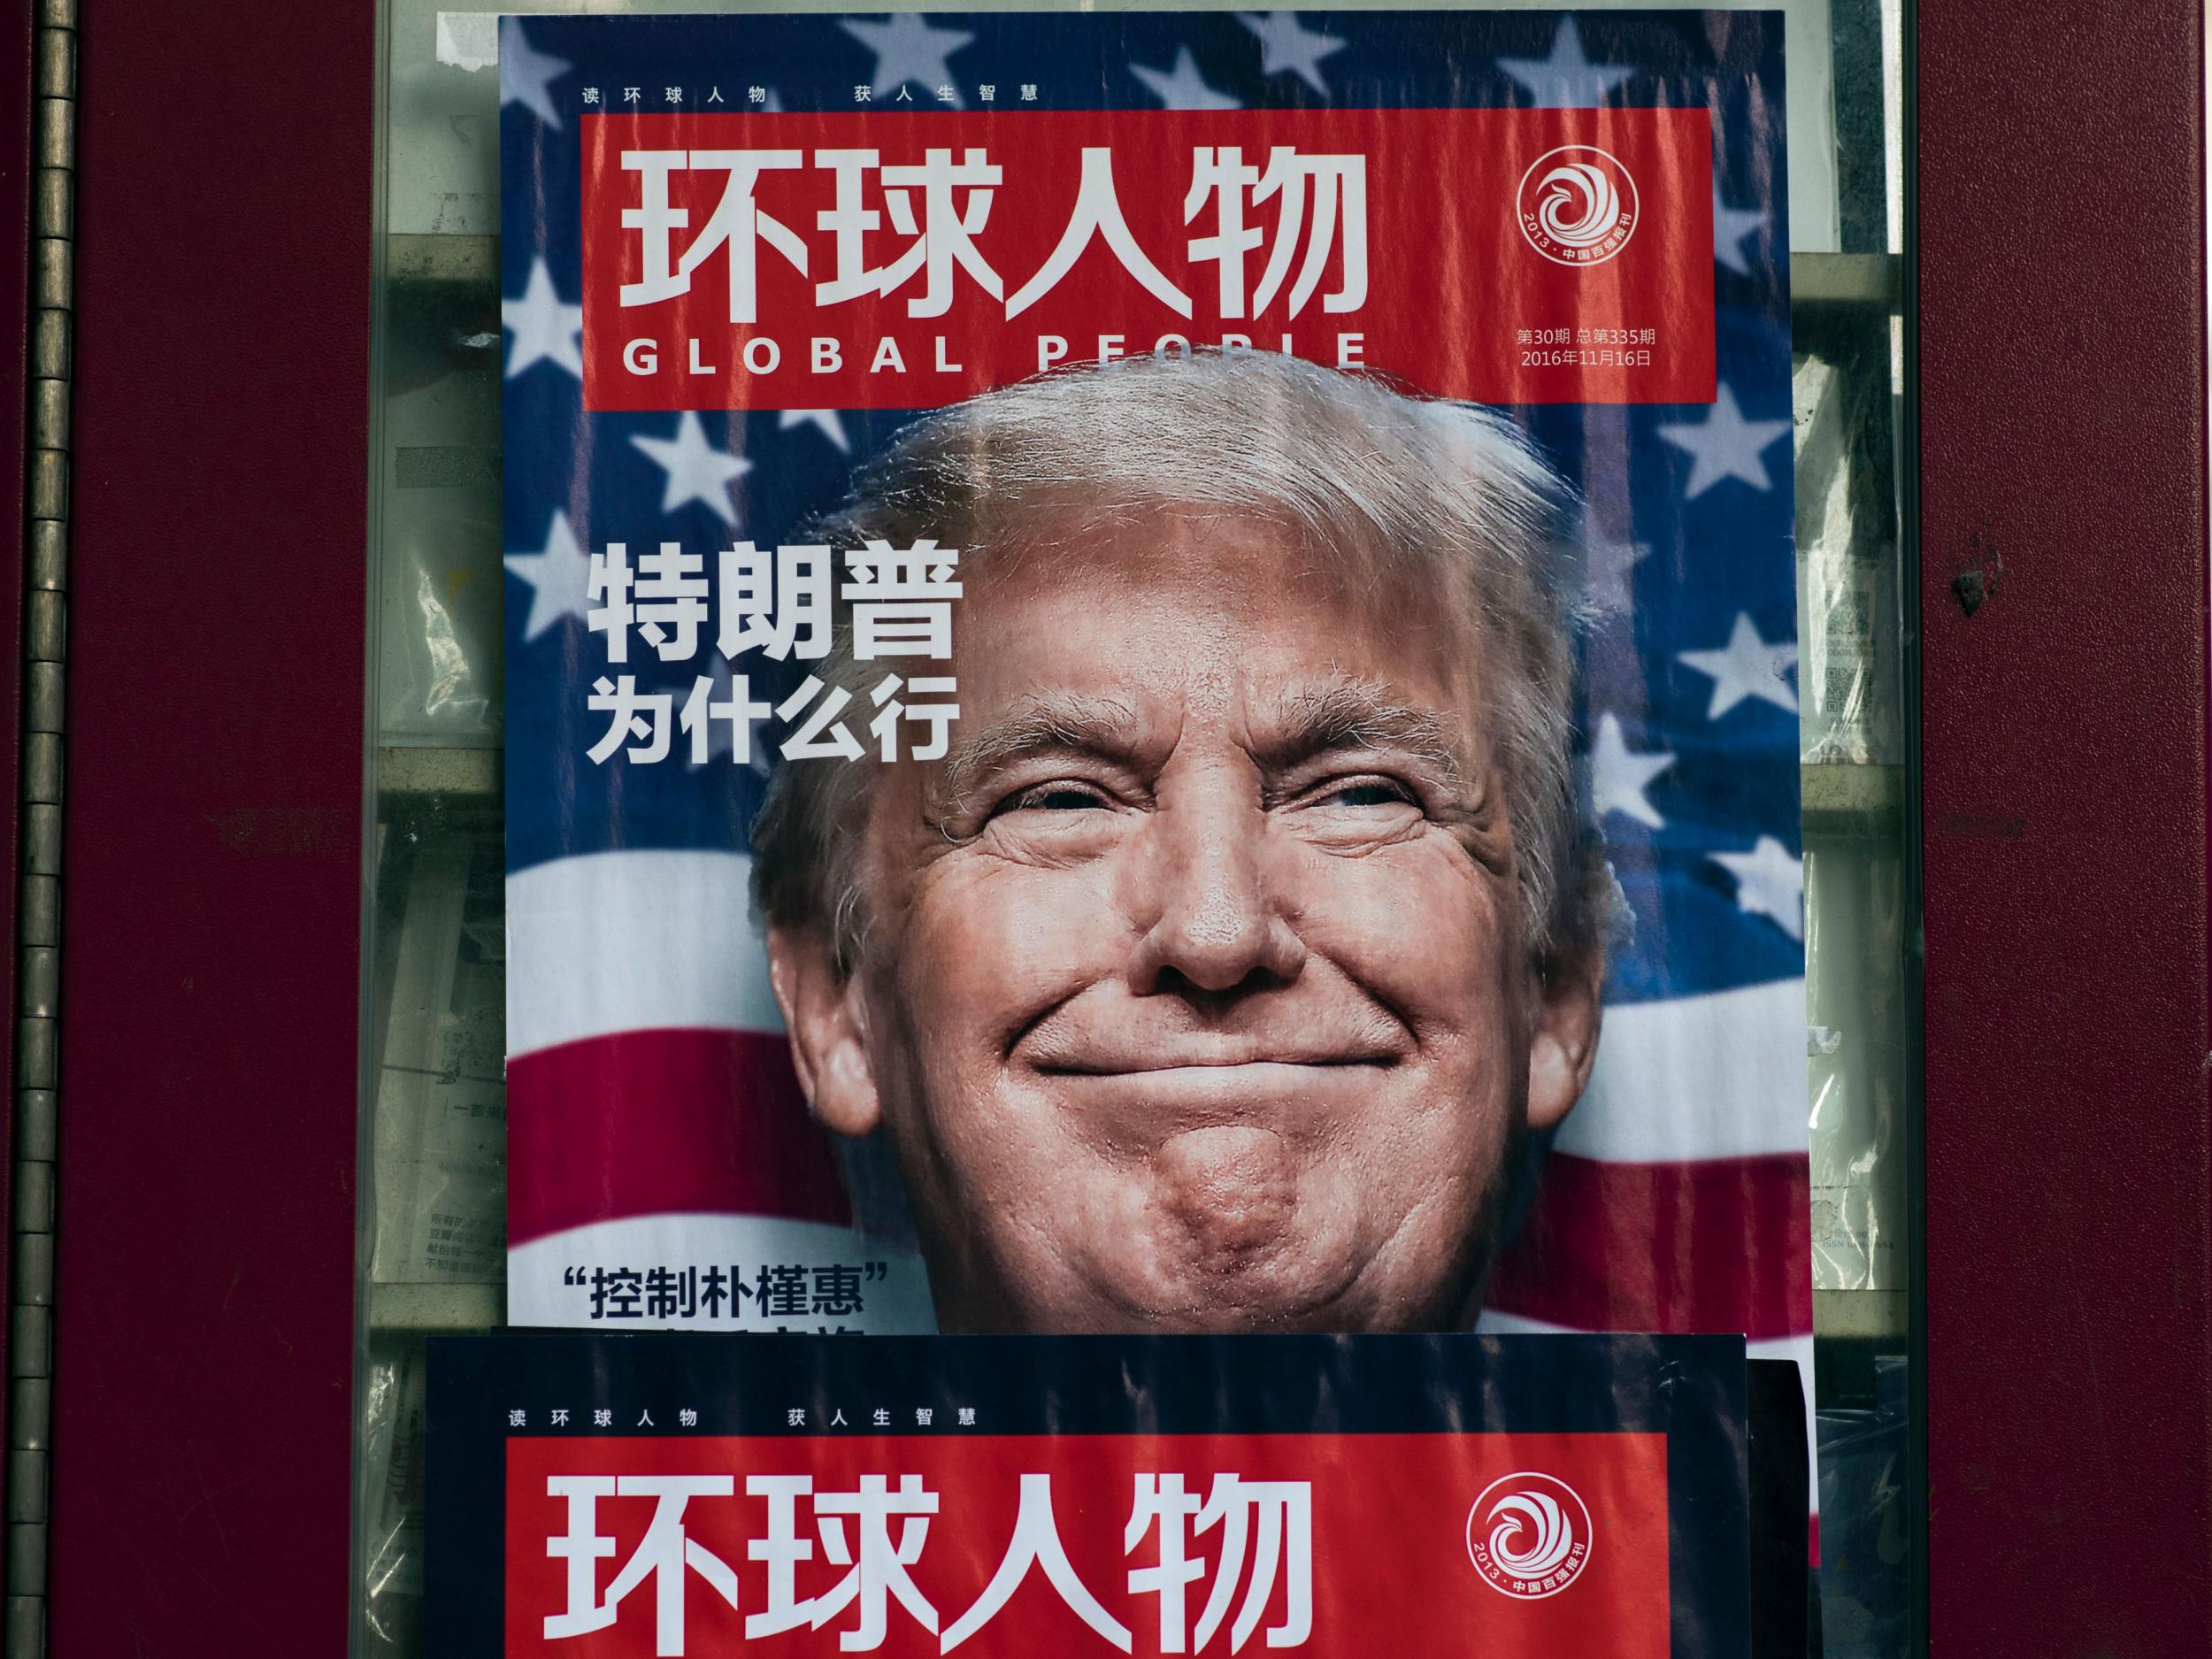 Chinese media have been closely watching the incoming Trump administration